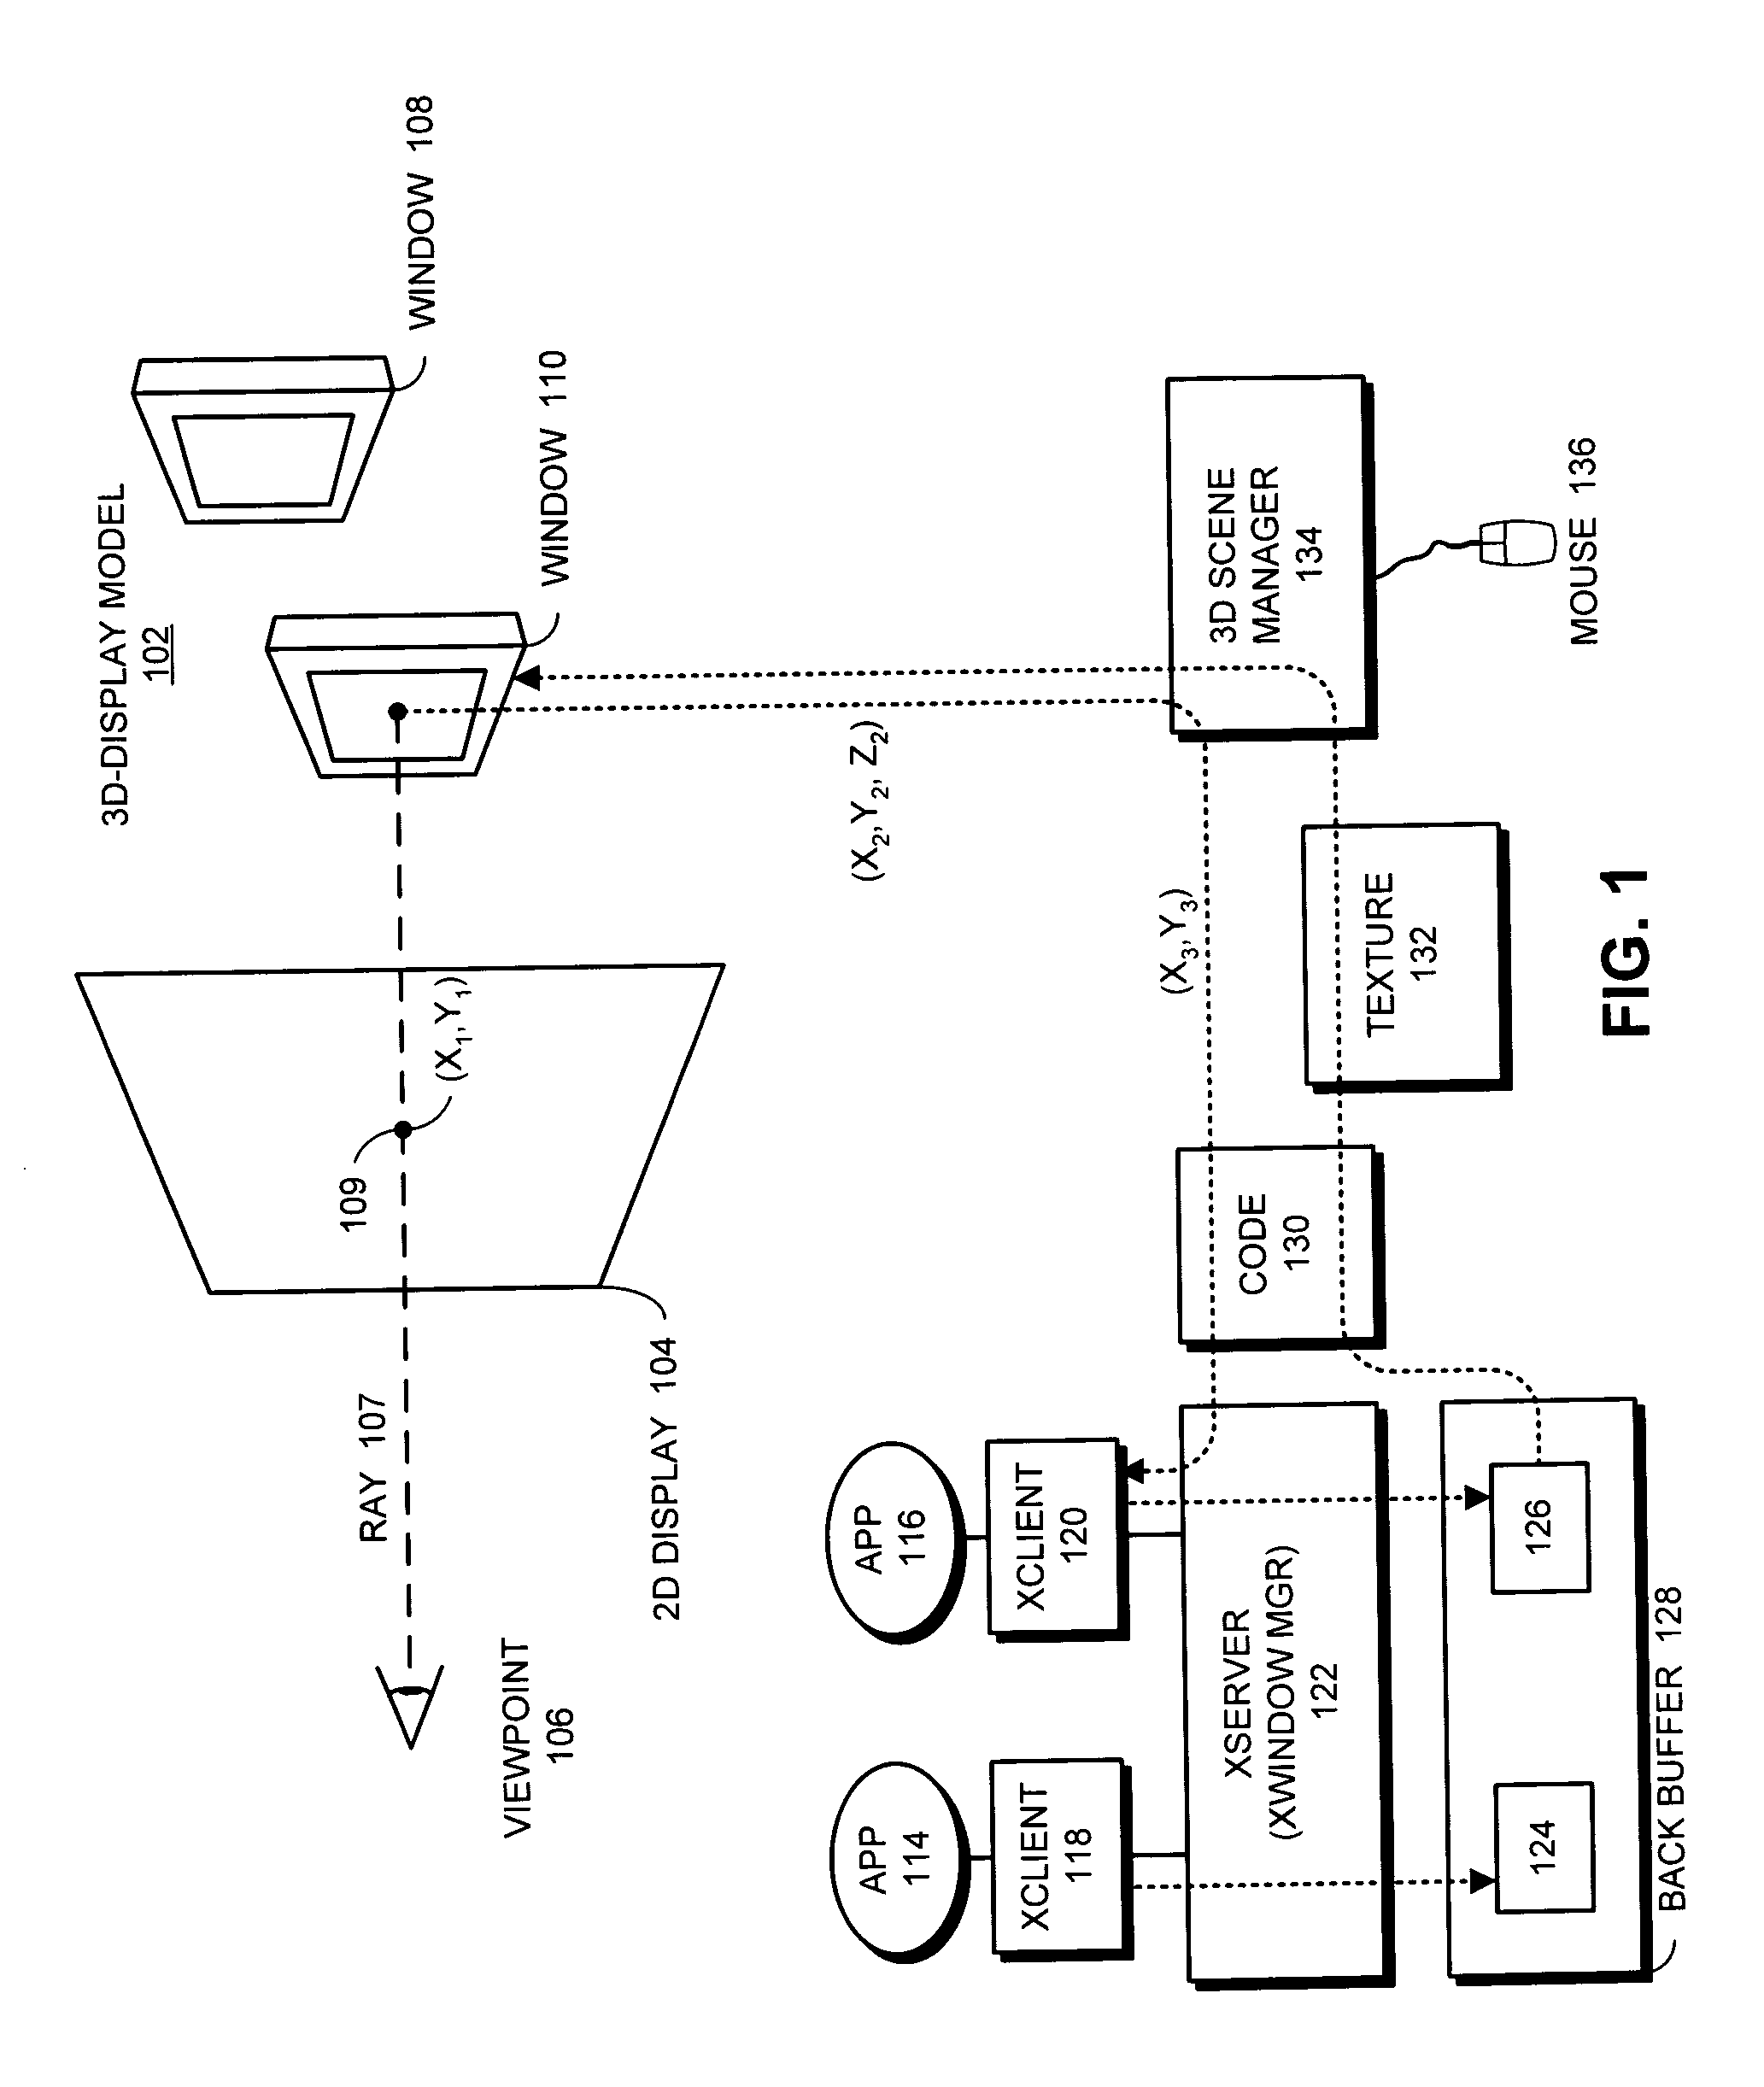 Enhancements for manipulating two-dimensional windows within a three-dimensional display model